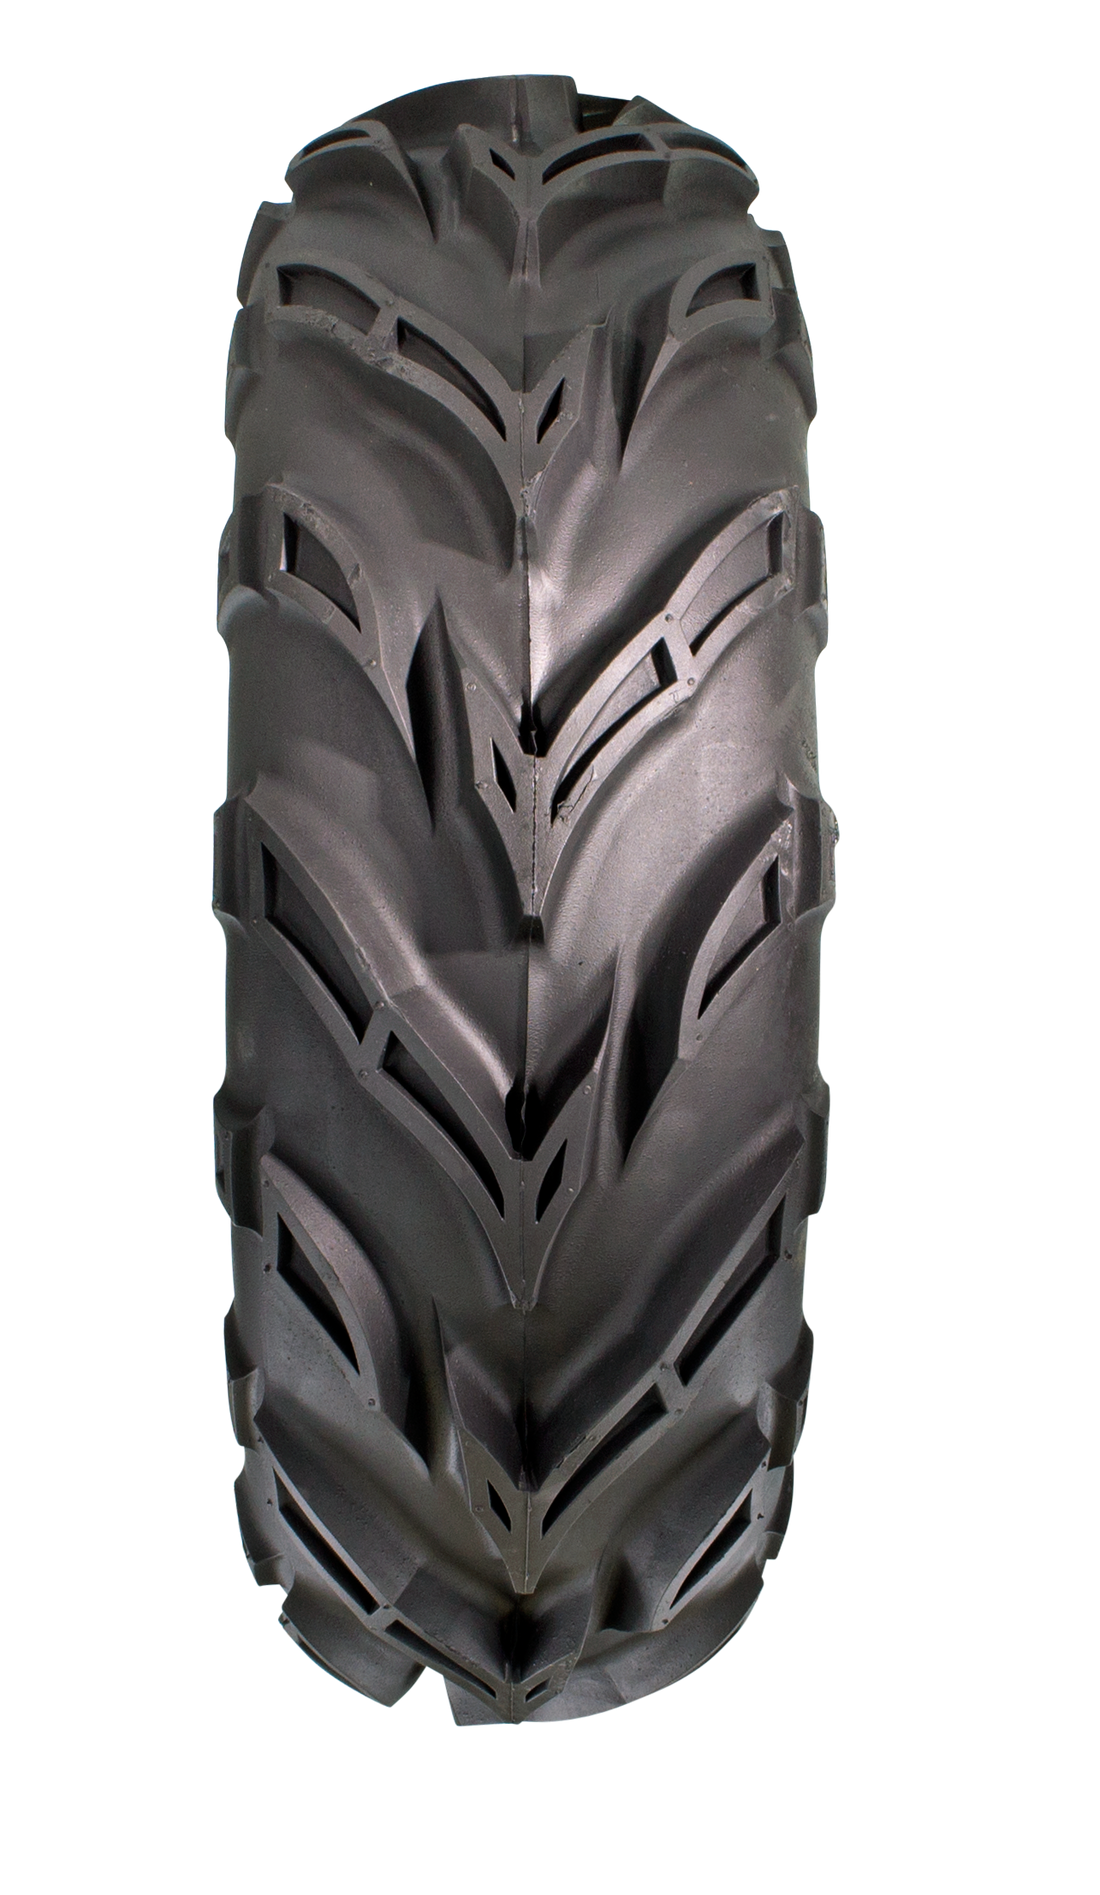 Full frontal view of Dirt Devil Powersport tire exhibiting its deep V-type tread pattern, designed for superior grip and traction in challenging terrains.